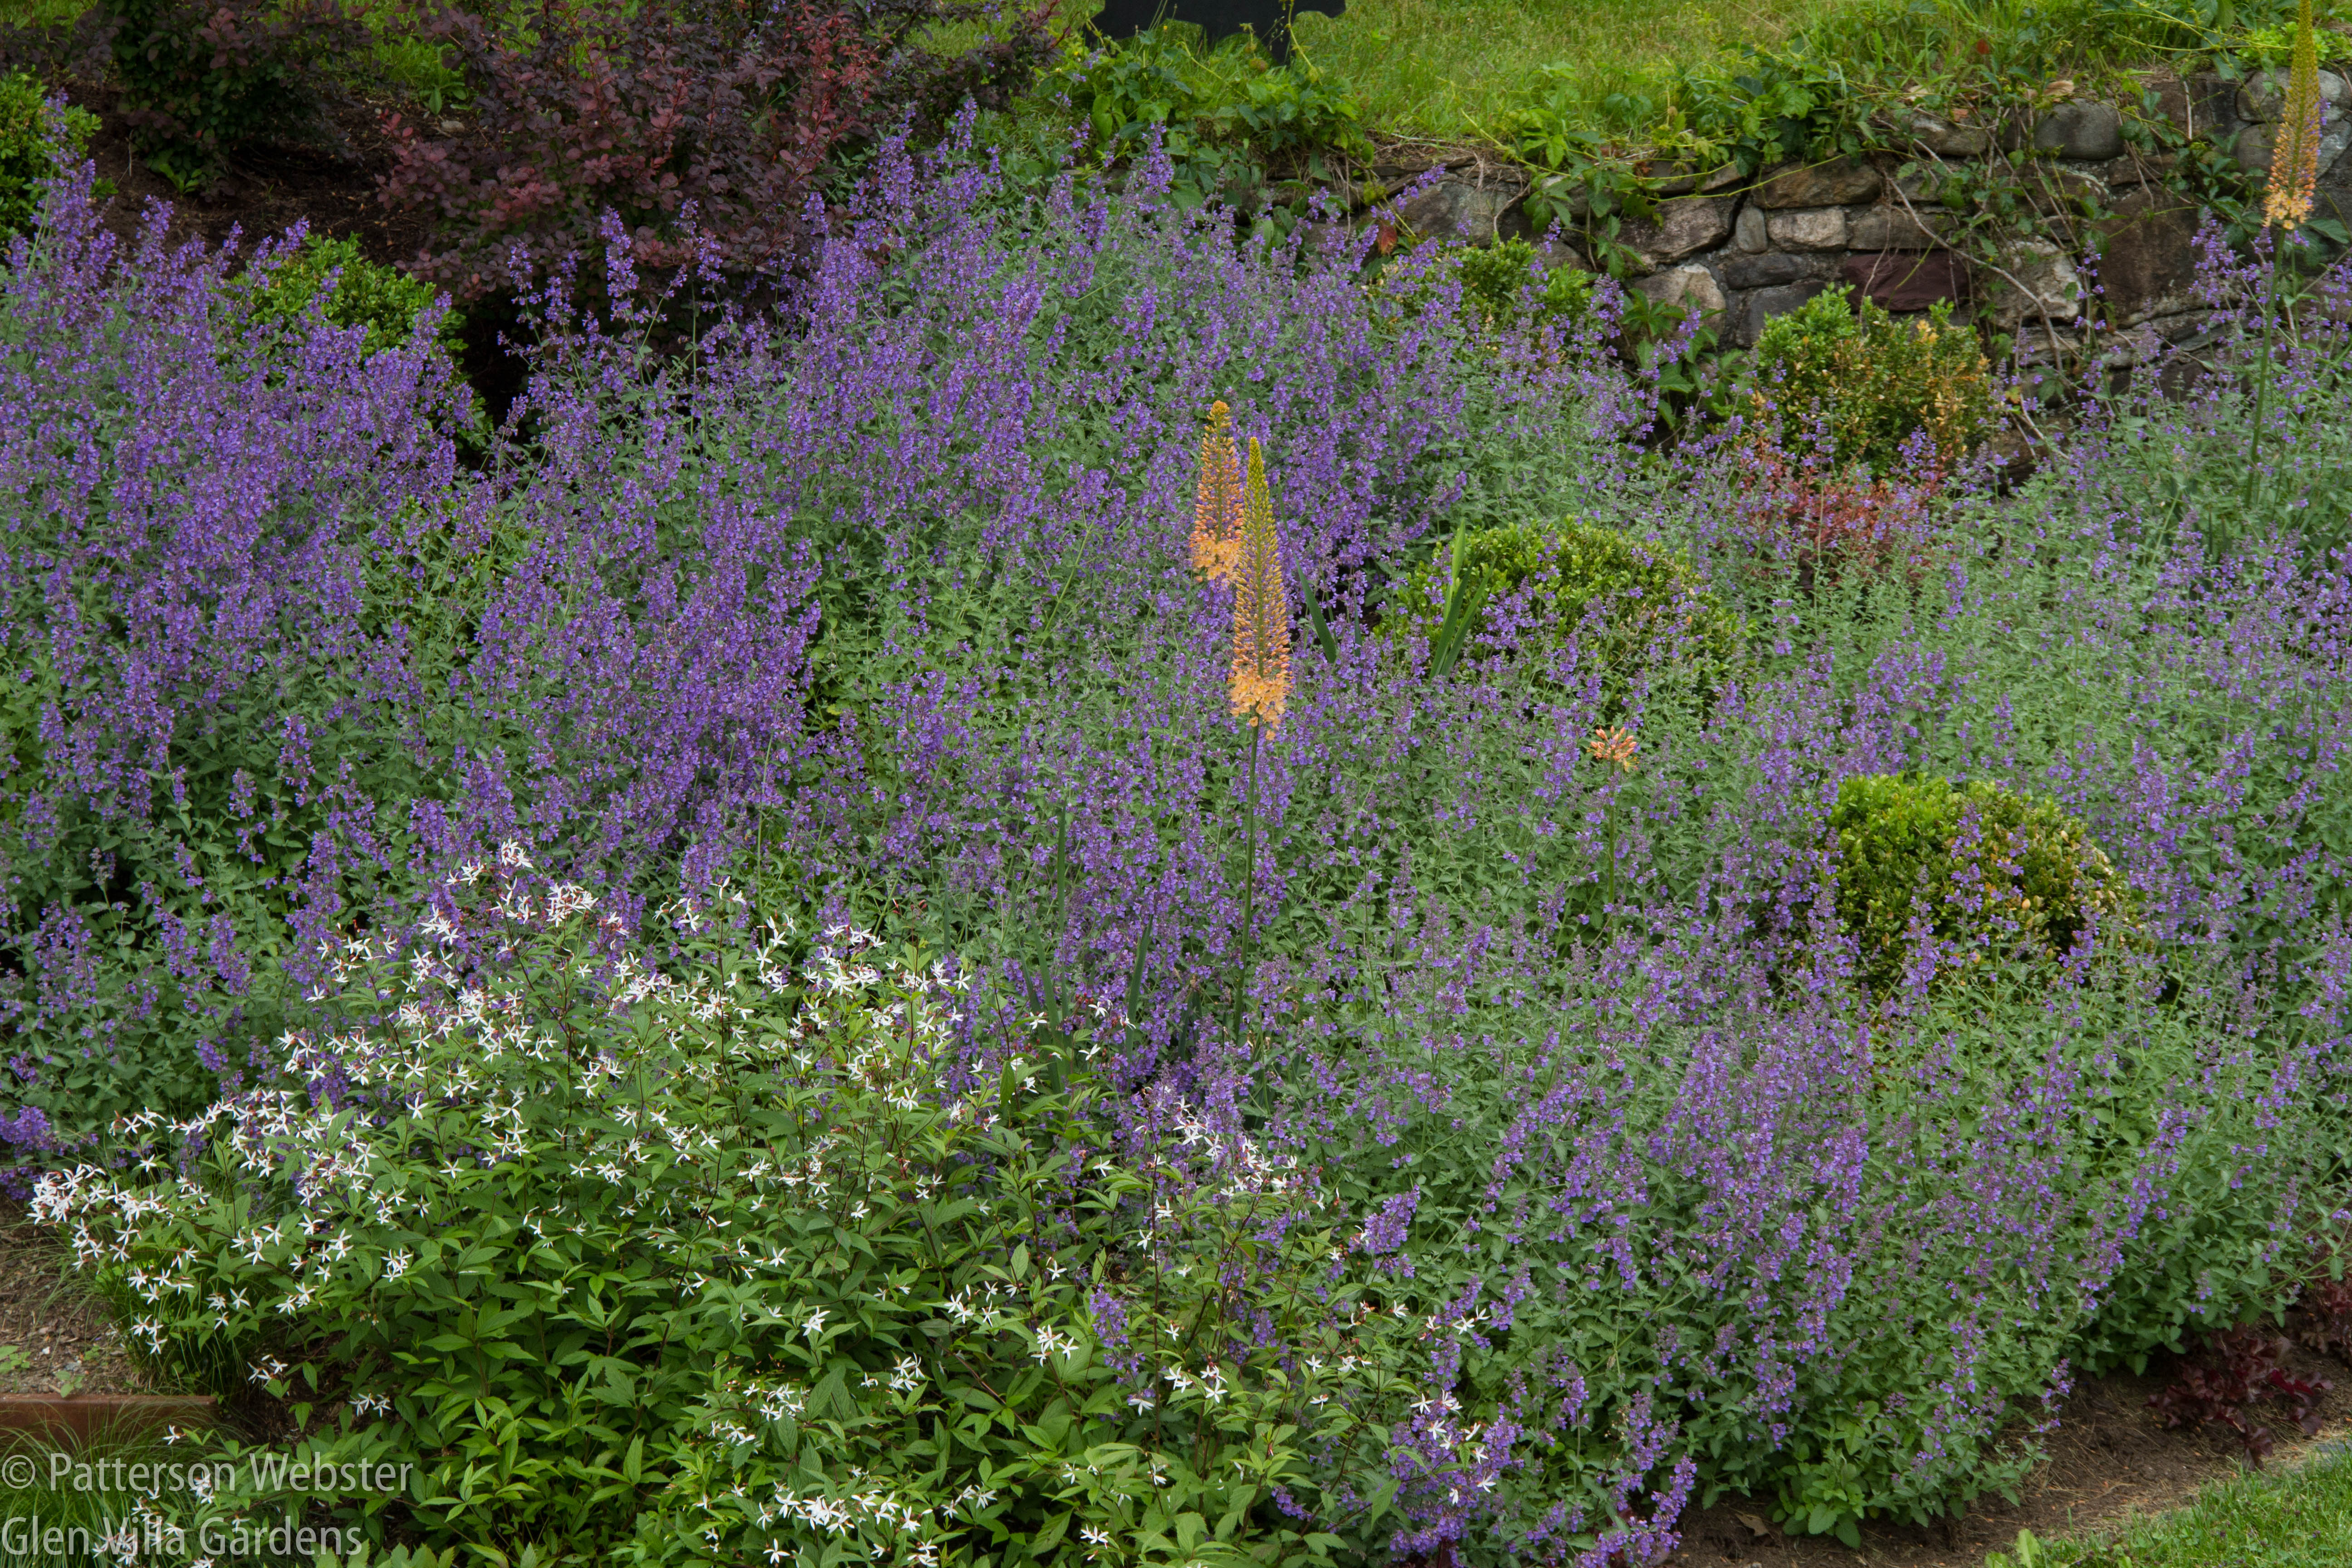 Perhaps my favourite combination this year was the Eremurus 'Cleopatra' rising up from the Nepeta at the Aqueduct.